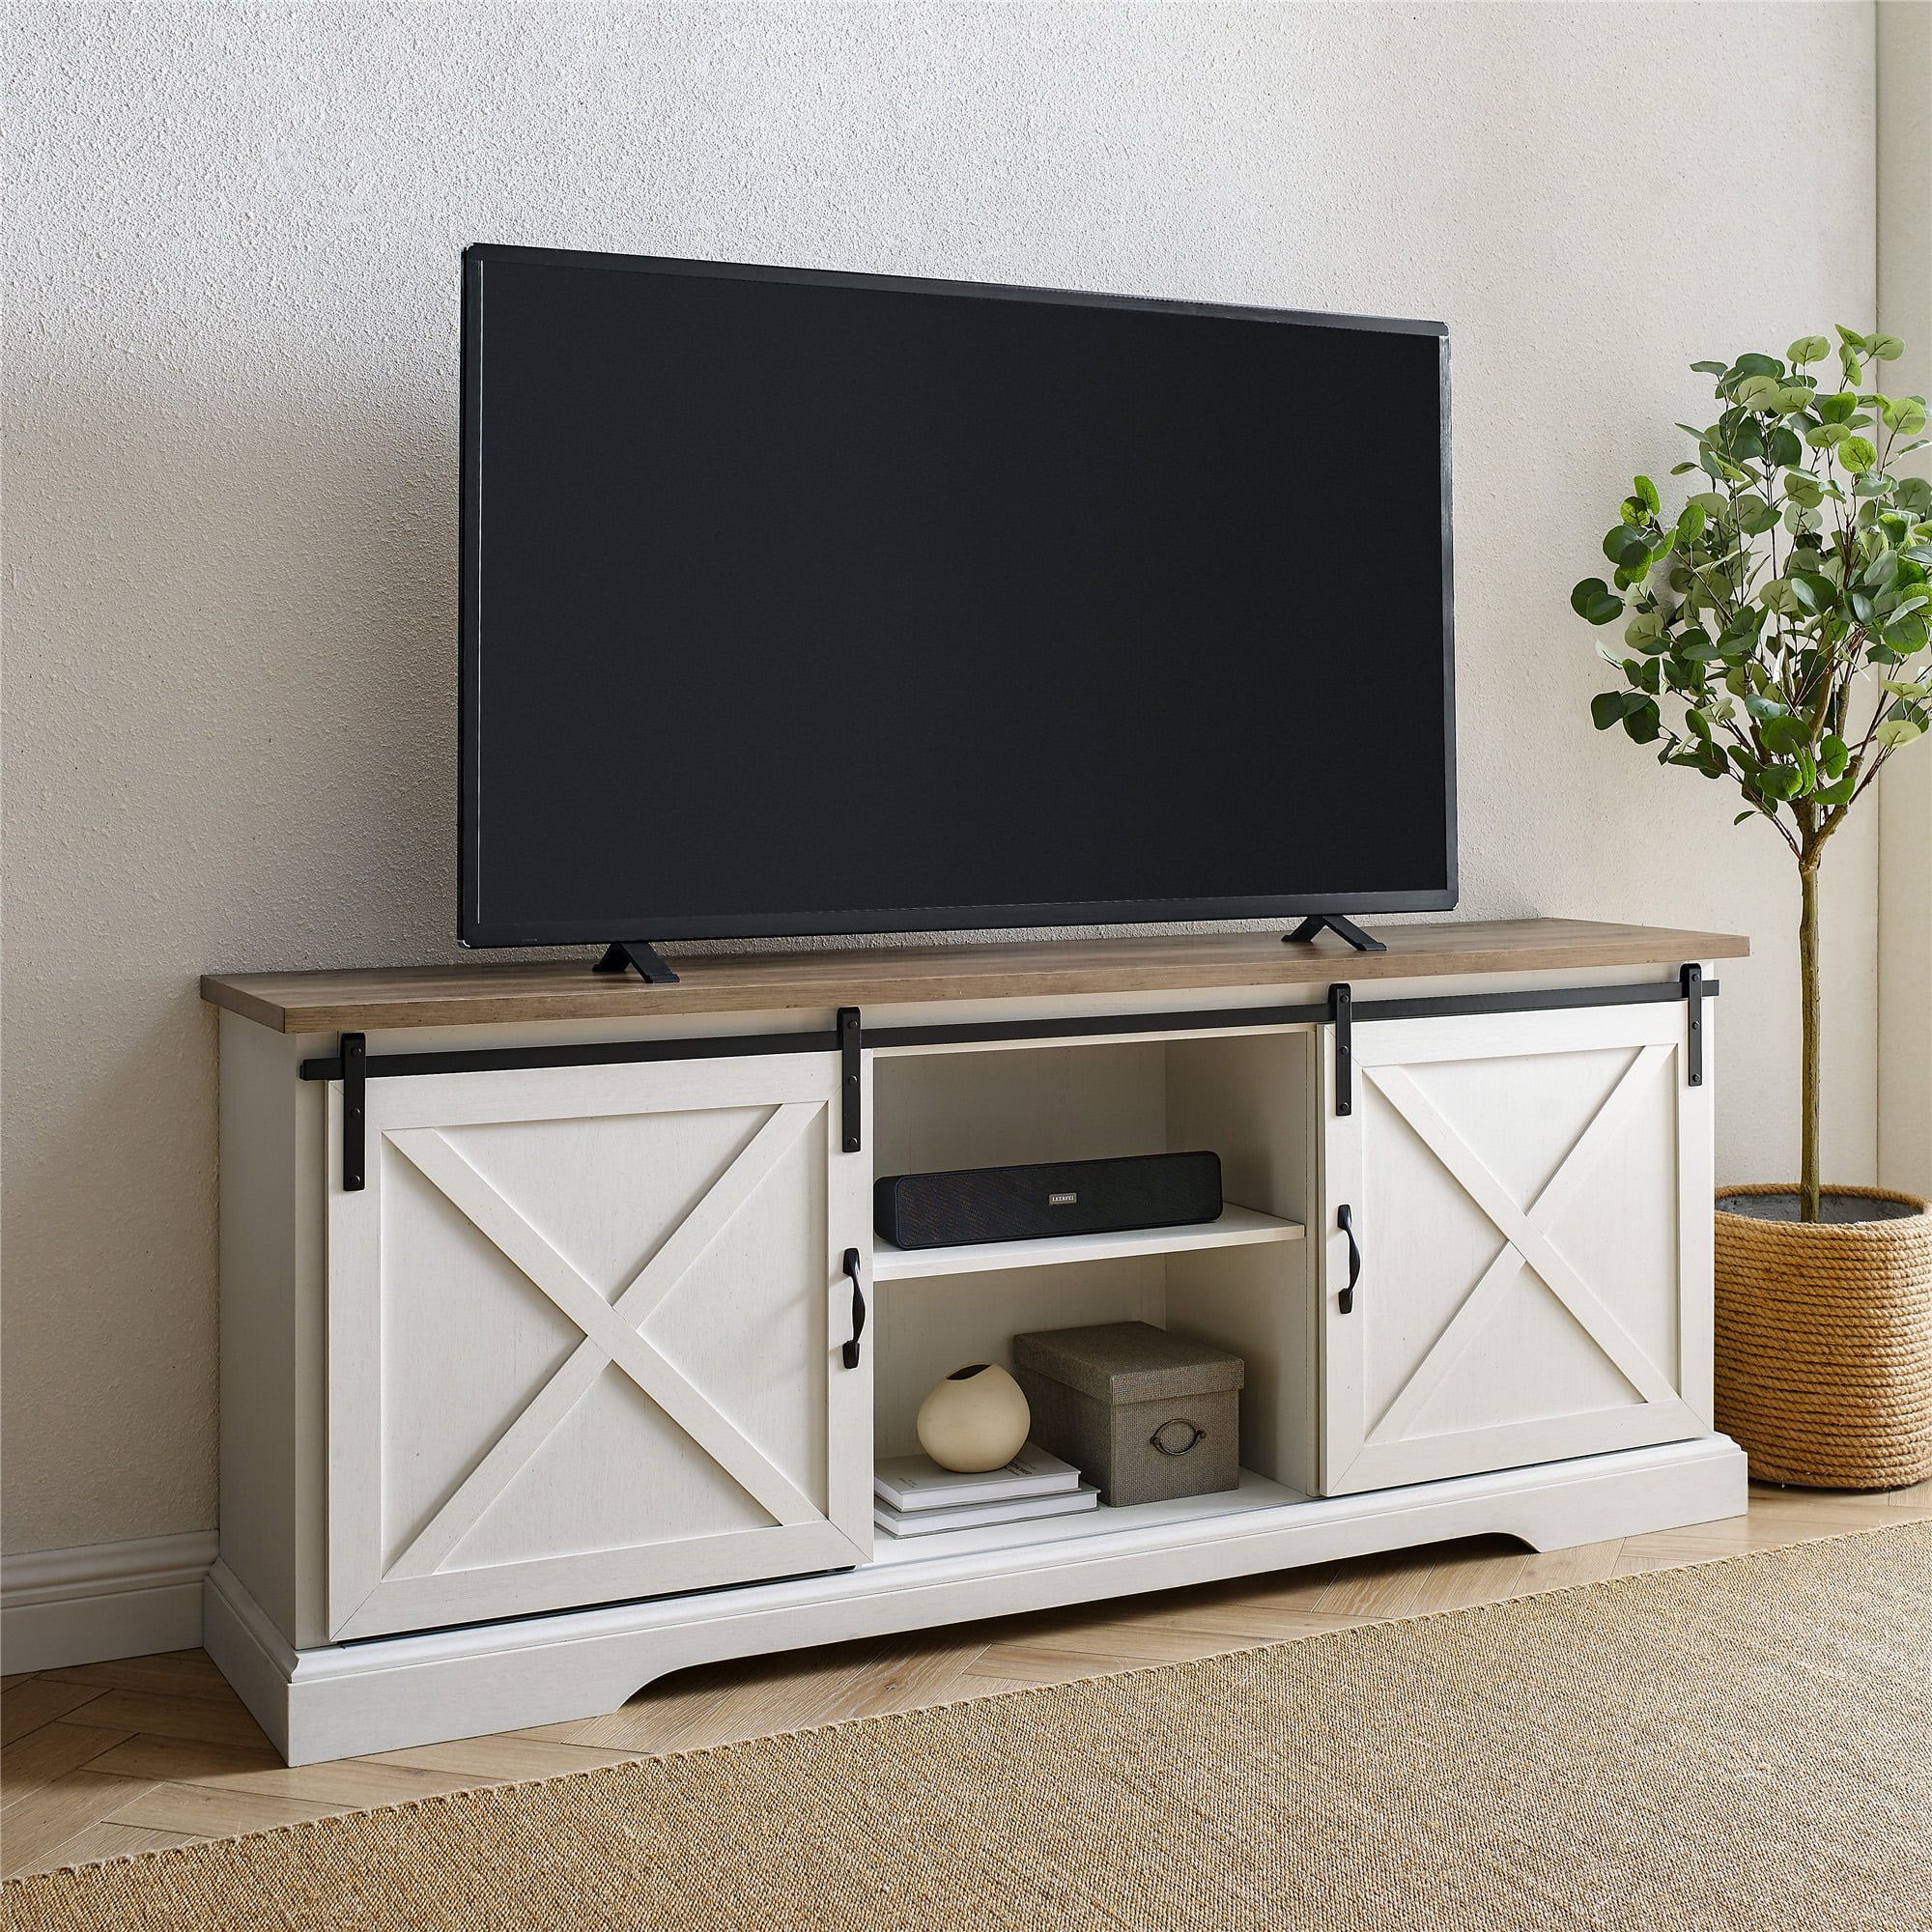 Manor Park Sliding Door Tv Stand For Tvs Up To 80", White/barnwood Throughout White Tv Stands Entertainment Center (View 11 of 20)